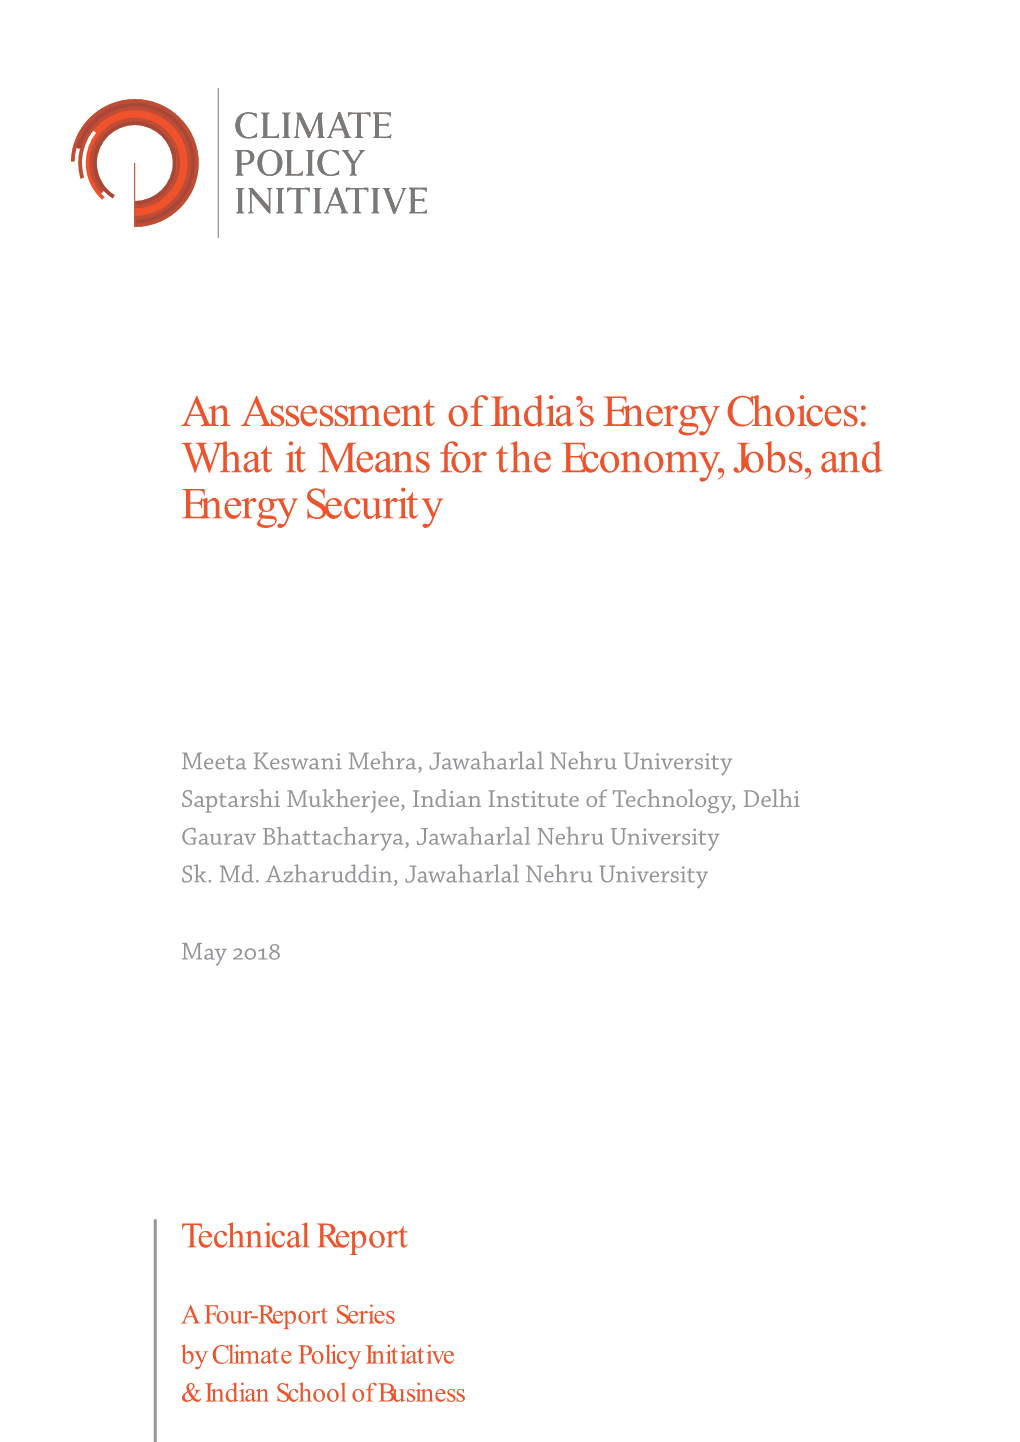 An Assessment of India's Energy Choices: What It Means for the Economy, Jobs, and Energy Security